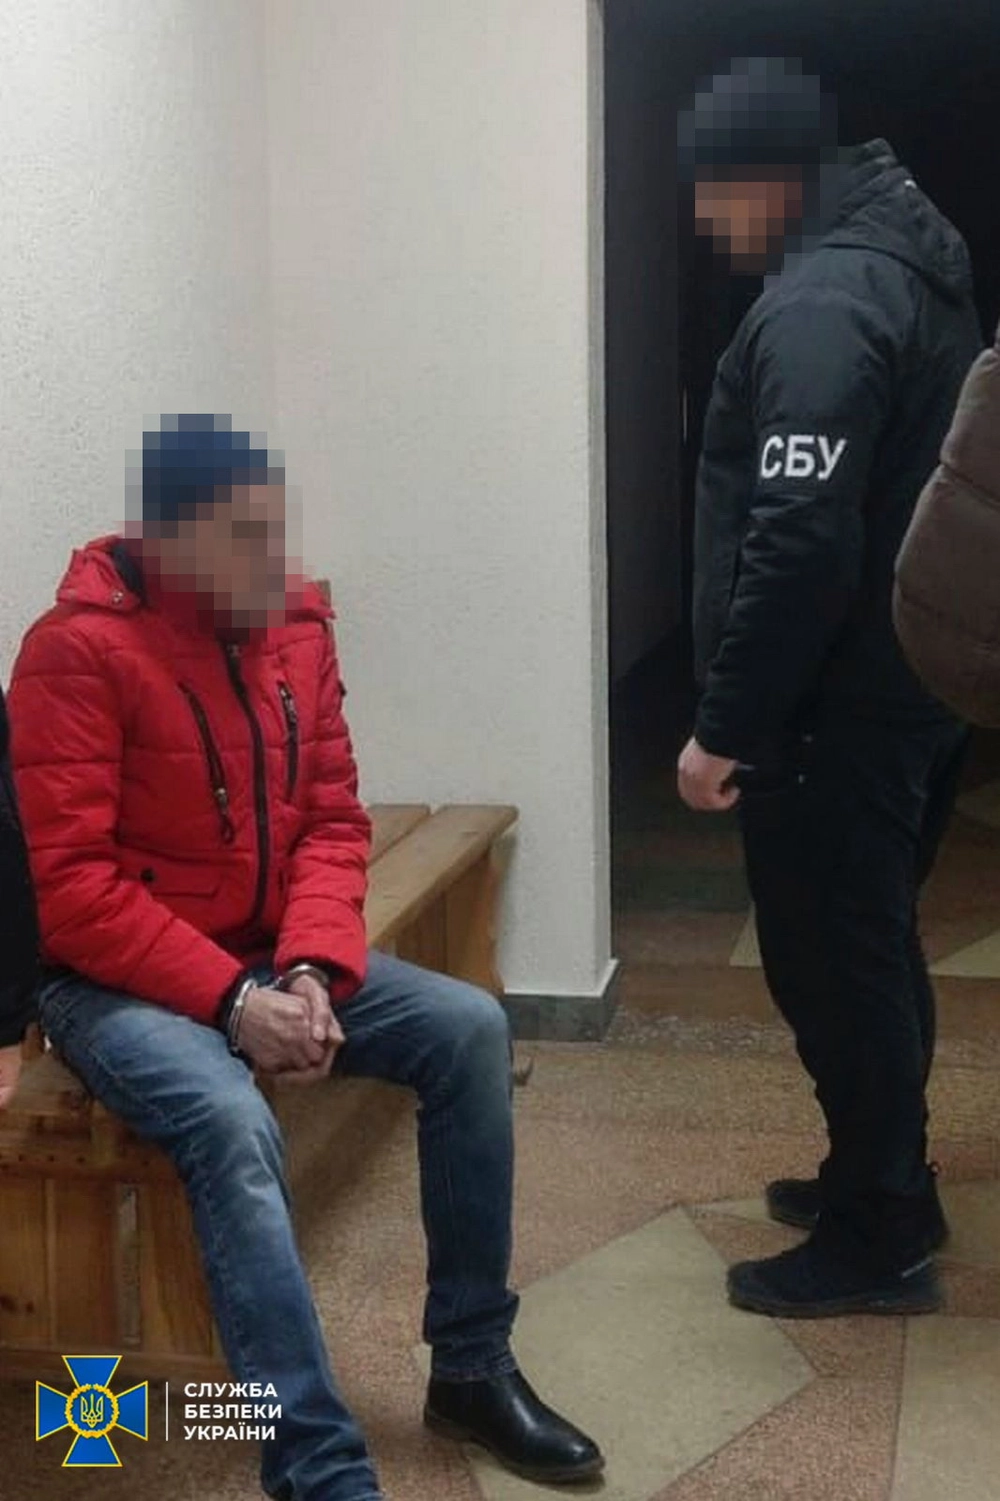 he-wanted-to-escape-to-the-occupiers-law-enforcement-detained-a-collaborator-who-was-spying-on-the-armed-forces-during-the-occupation-of-kharkiv-region